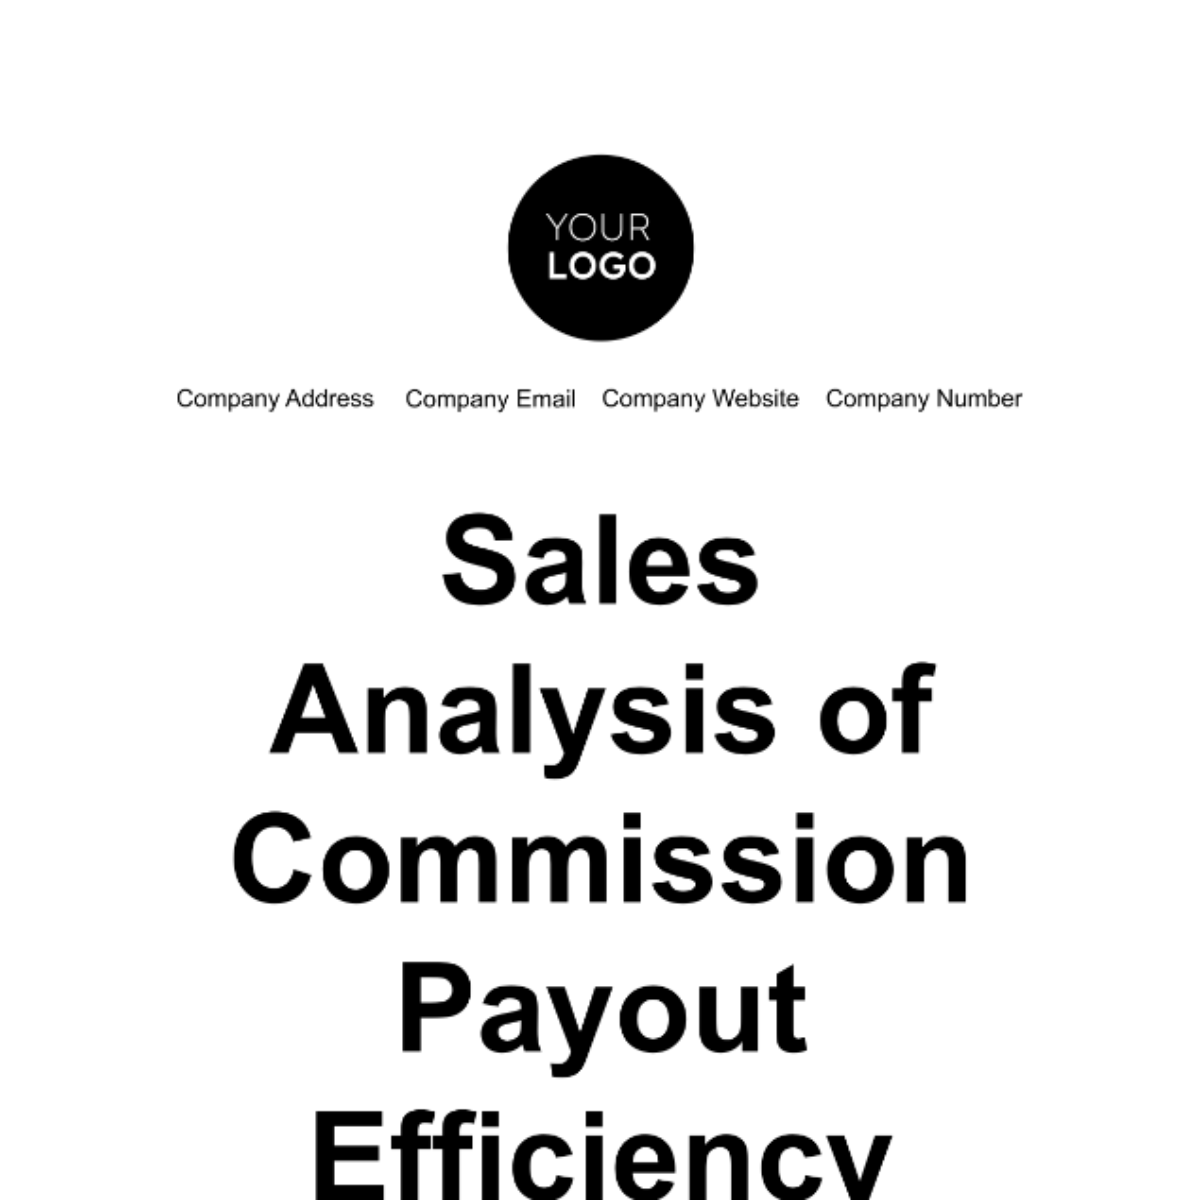 Free Sales Analysis of Commission Payout Efficiency Template